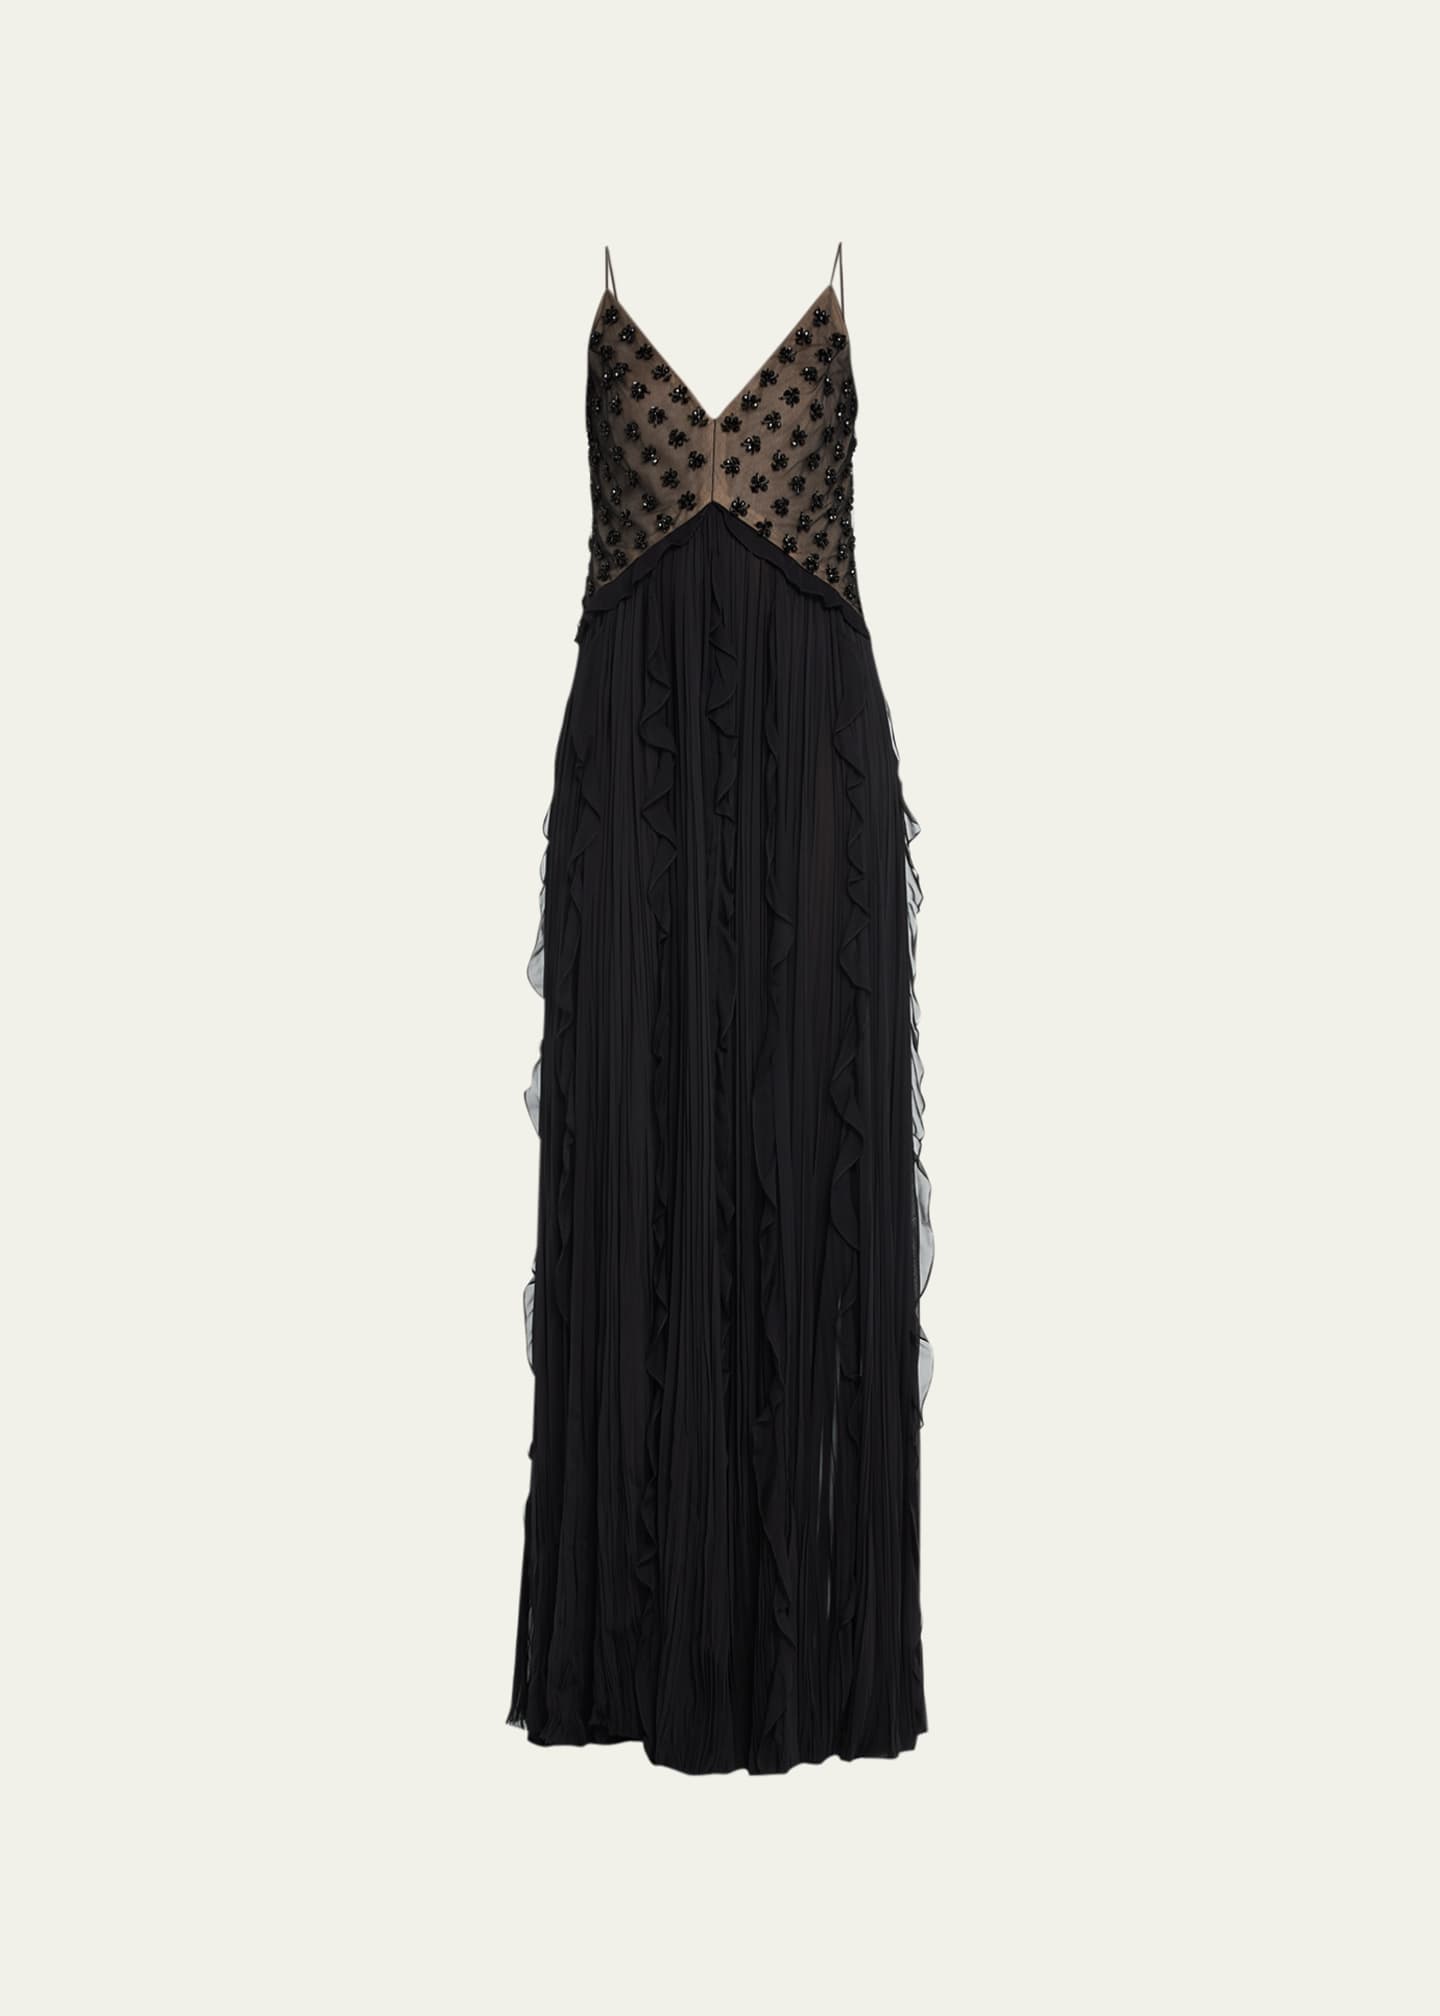 J. Mendel Embroidered Floral Silk Hand Pleated Ruffles Gown - Bergdorf ...